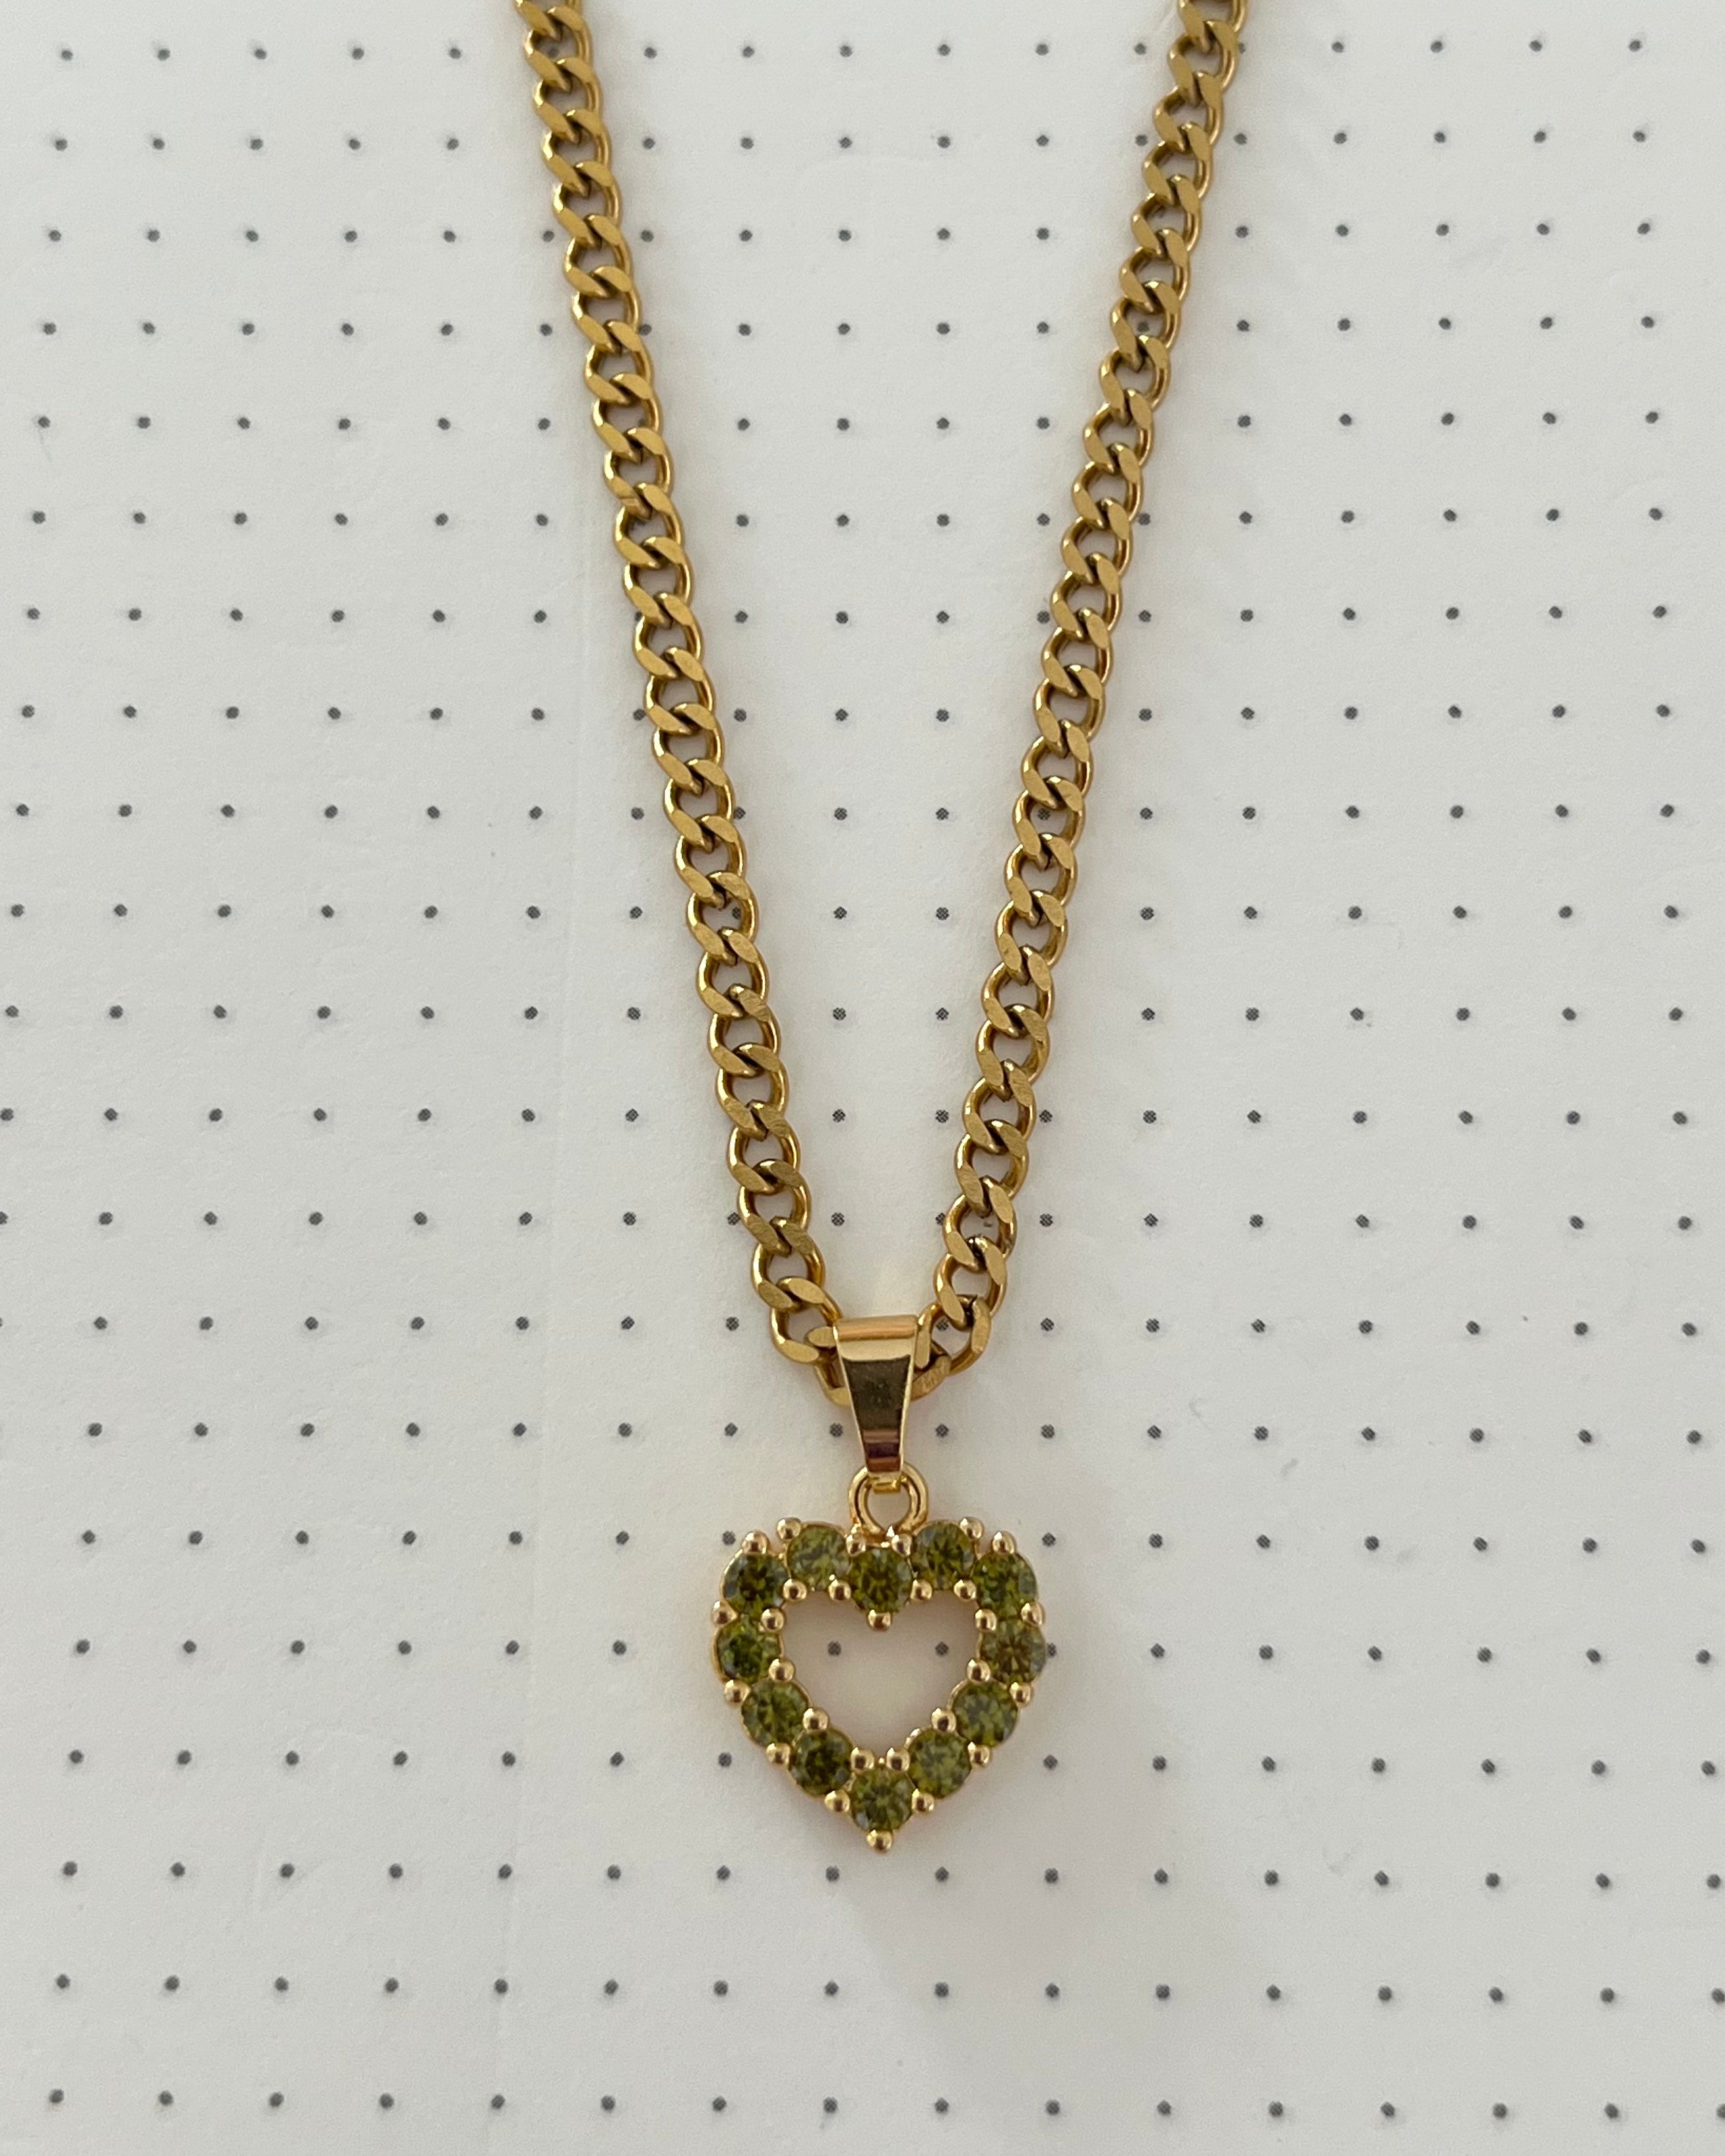 Stone Heart necklace